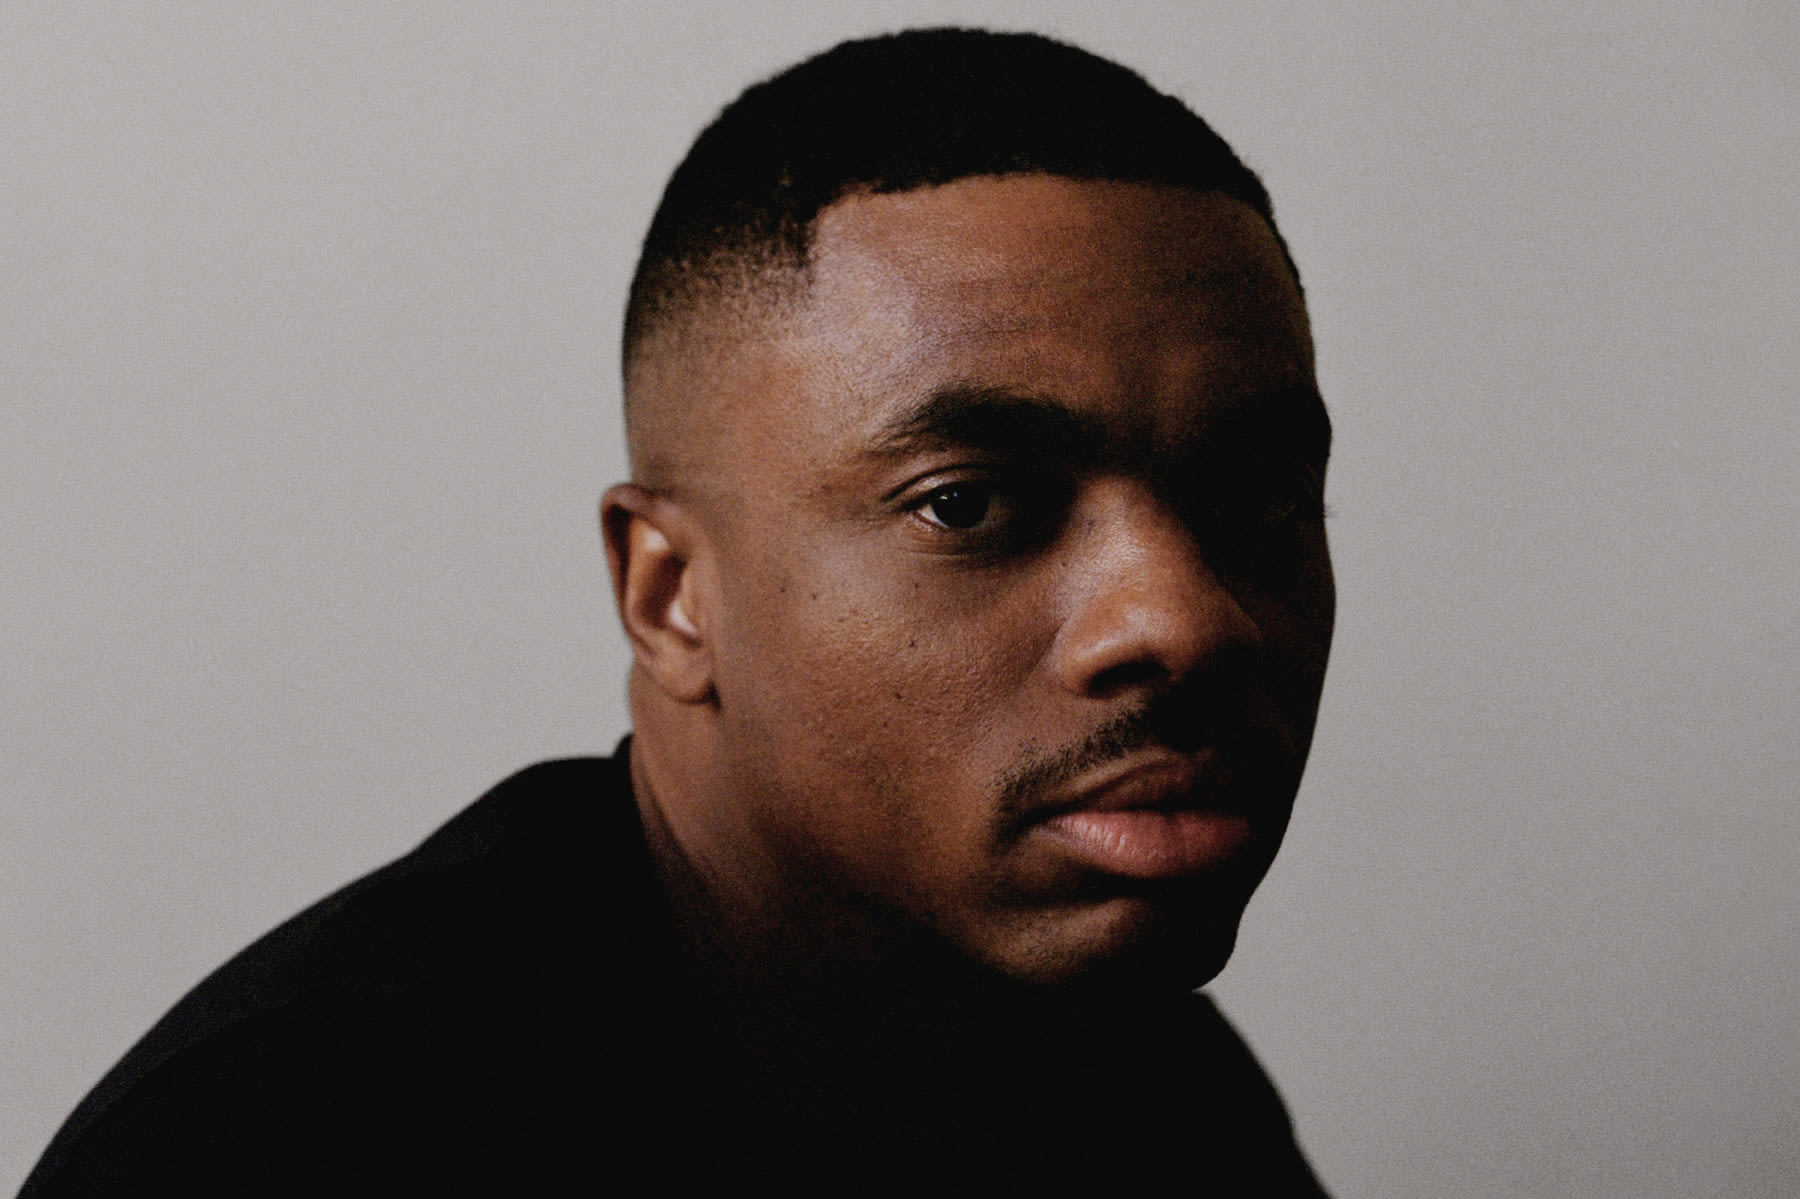 Vince Staples on His New Album, Making a Netflix Series, and Where Hip-Hop Goes Next